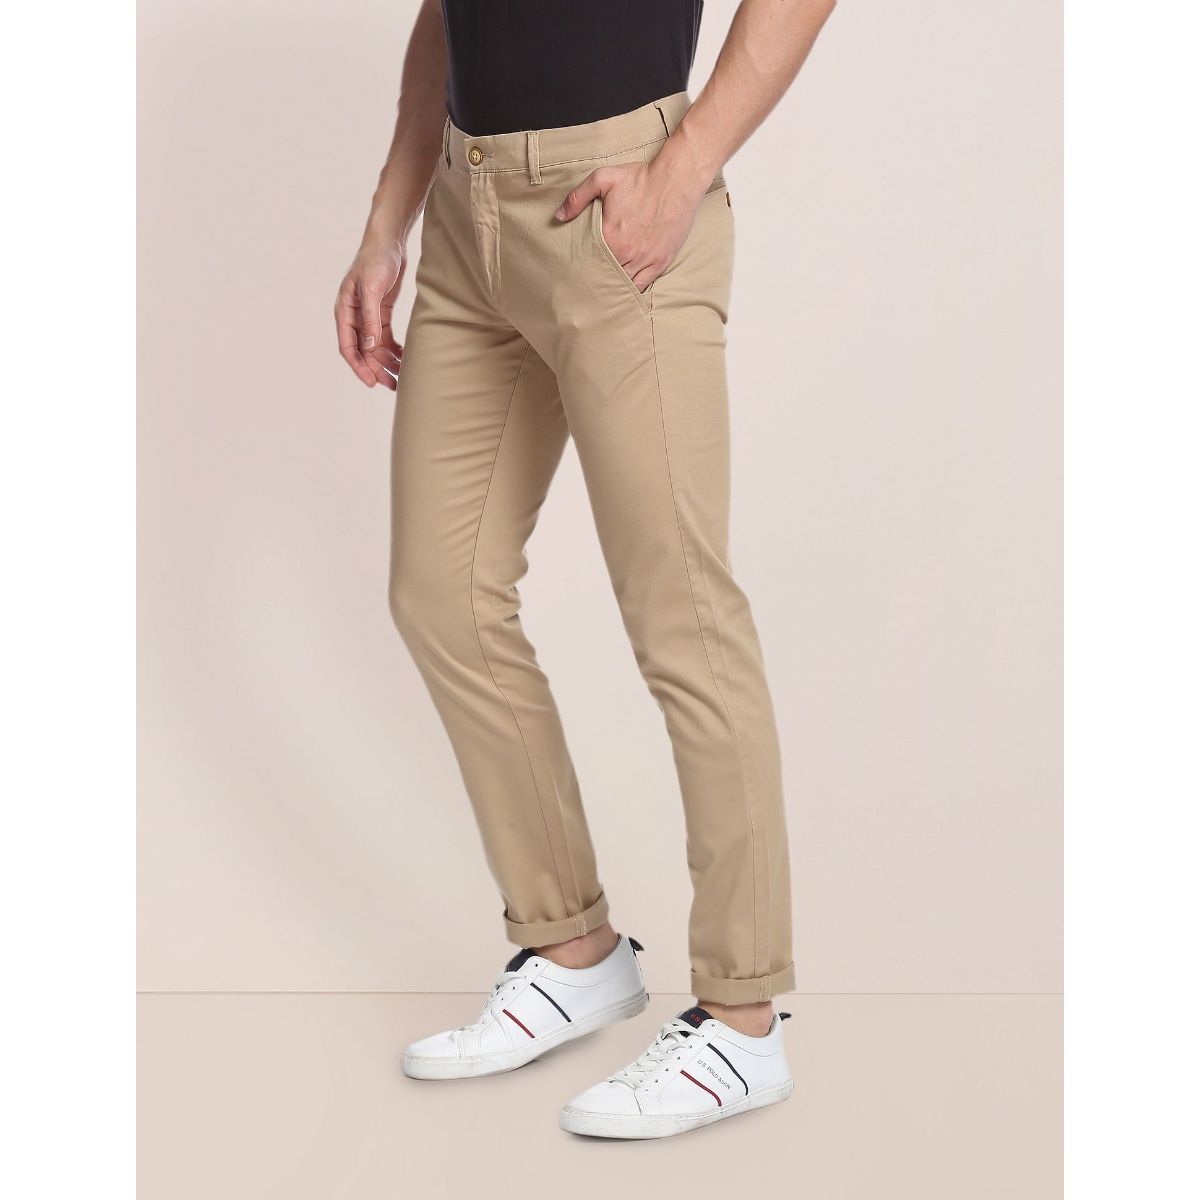 Buy U.S. Polo Assn. Mid Rise Patterned Casual Trousers - NNNOW.com